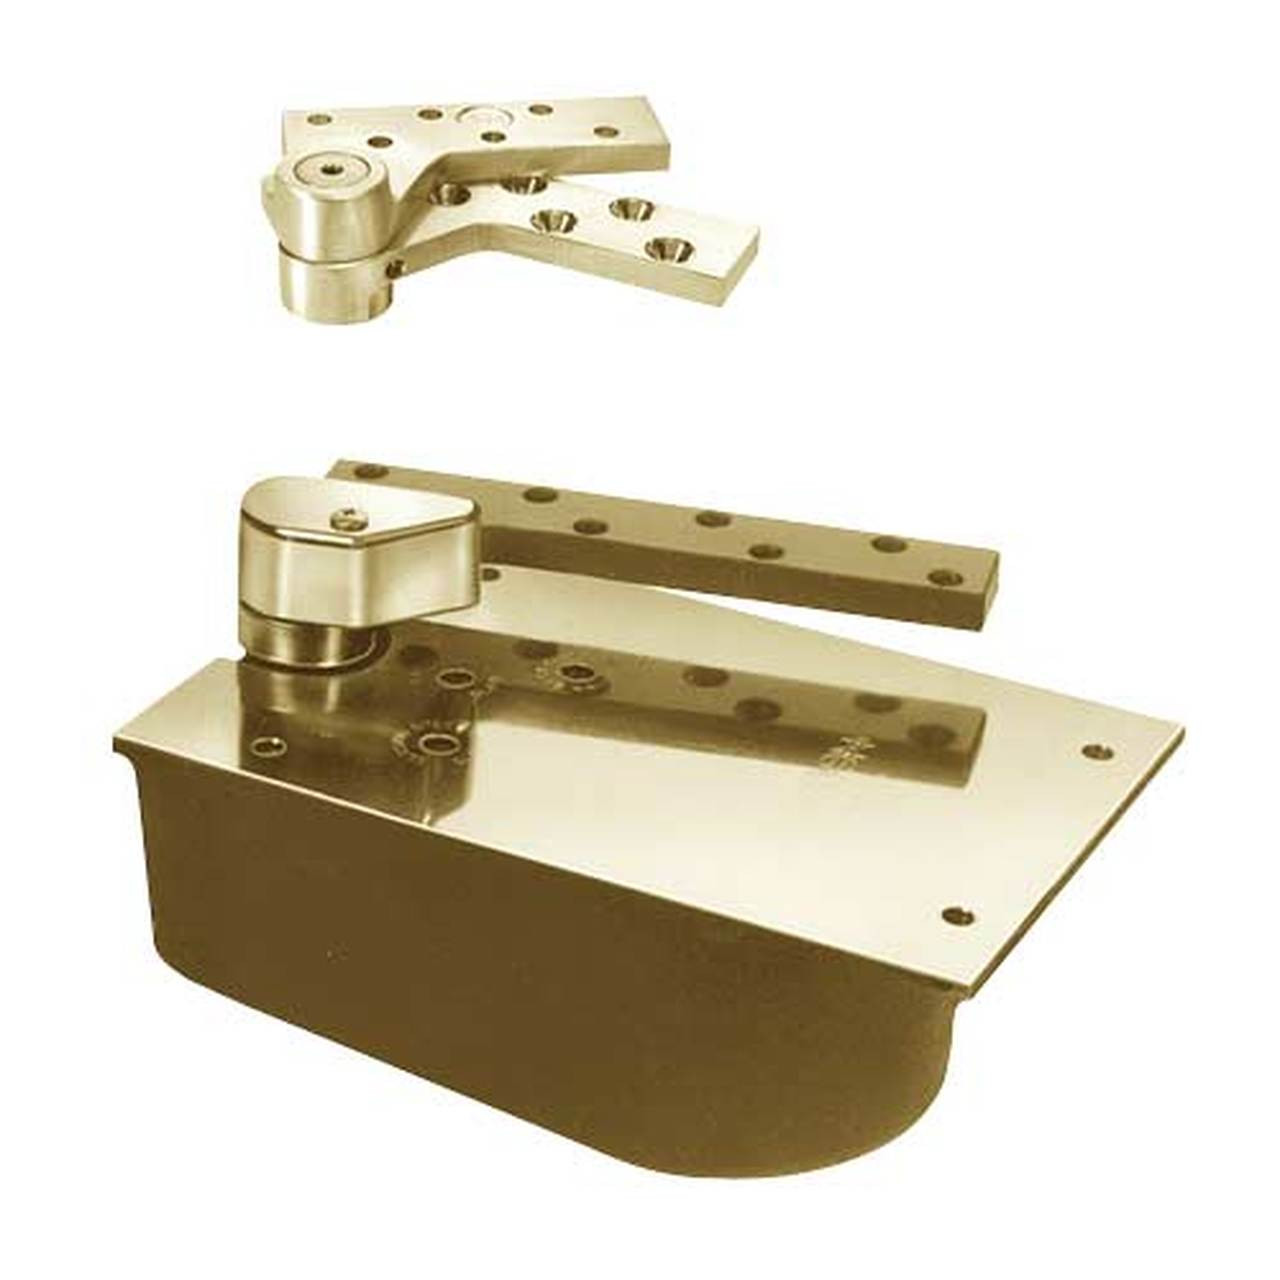 L27-105S-LFP-LCC-RH-3-606 Rixson 27 Series Extra Heavy Duty Lead Lined Offset Floor Closer in Satin Brass Finish